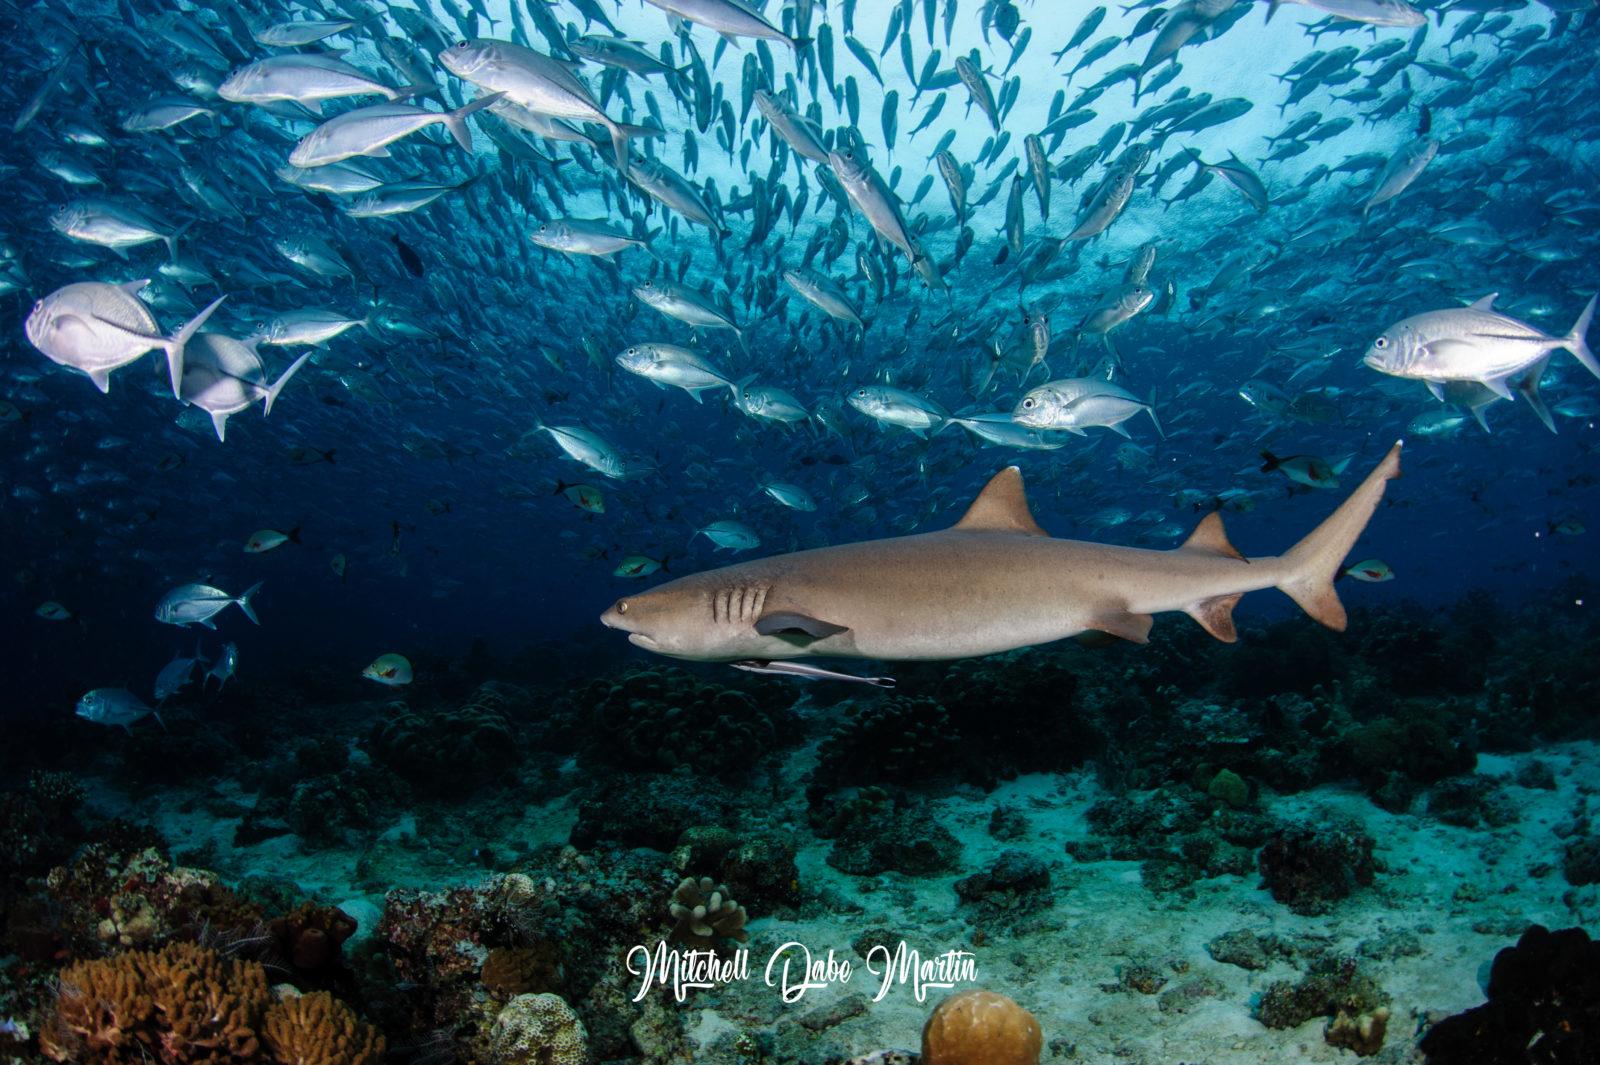 Diving with Sharks and School of Jackfish. Photo credit Mitchill Dabe Sipadan